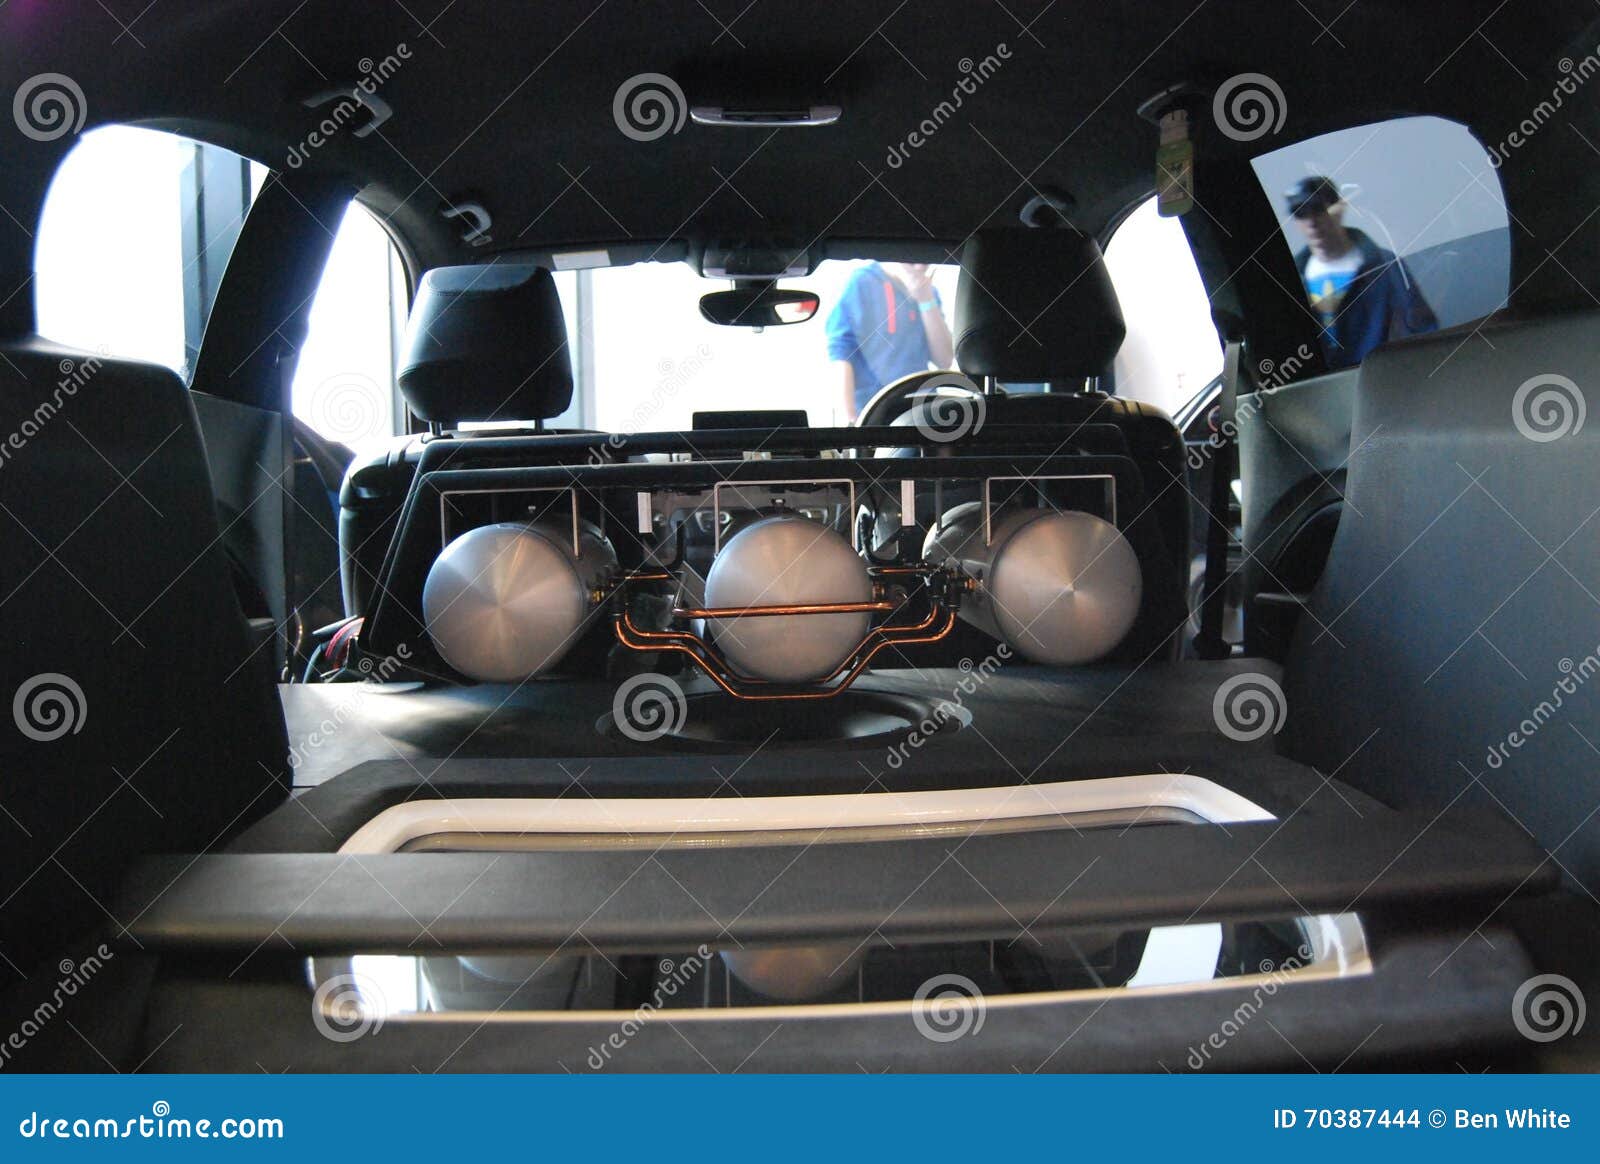 Air suspension editorial stock image. Image of automotive - 70387444